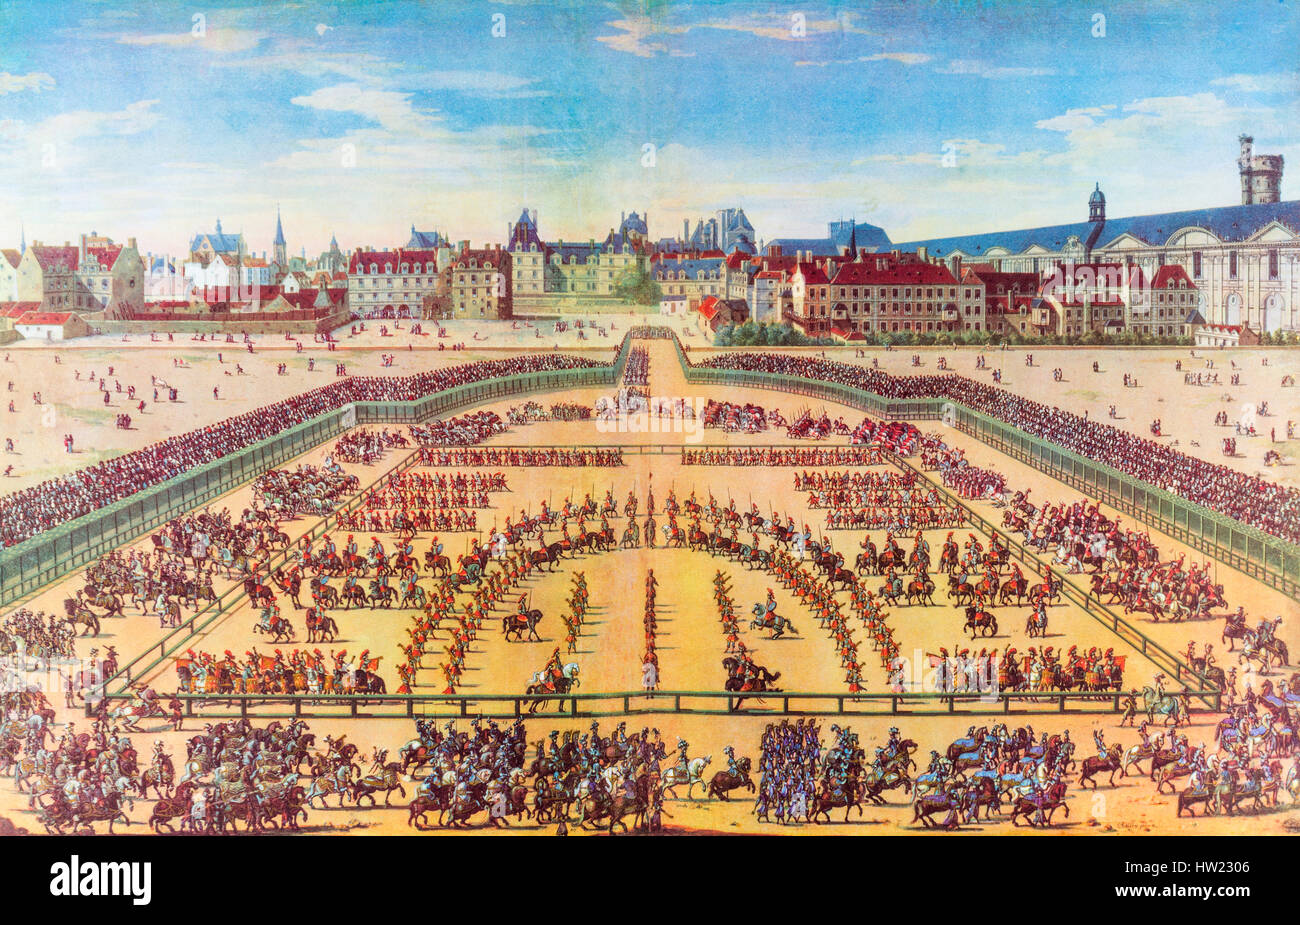 General view of the Grand Carousel, given by Louis XIV in front of the Tuileries, Paris, France, 5th June 1662, to celebrate the birth of the Dauphin. Taken from the stands which had been erected in front of the east facade of the palace of the Tuileries.  On the right the Medicis gallery with the old tower facing the tower of Nesle, on the left the district of the Rue Saint Honore opposite the mansions of the Rue Saint Nicaise which then separated the Louvre from the Tuileries, at the bottom the Louvre. Stock Photo